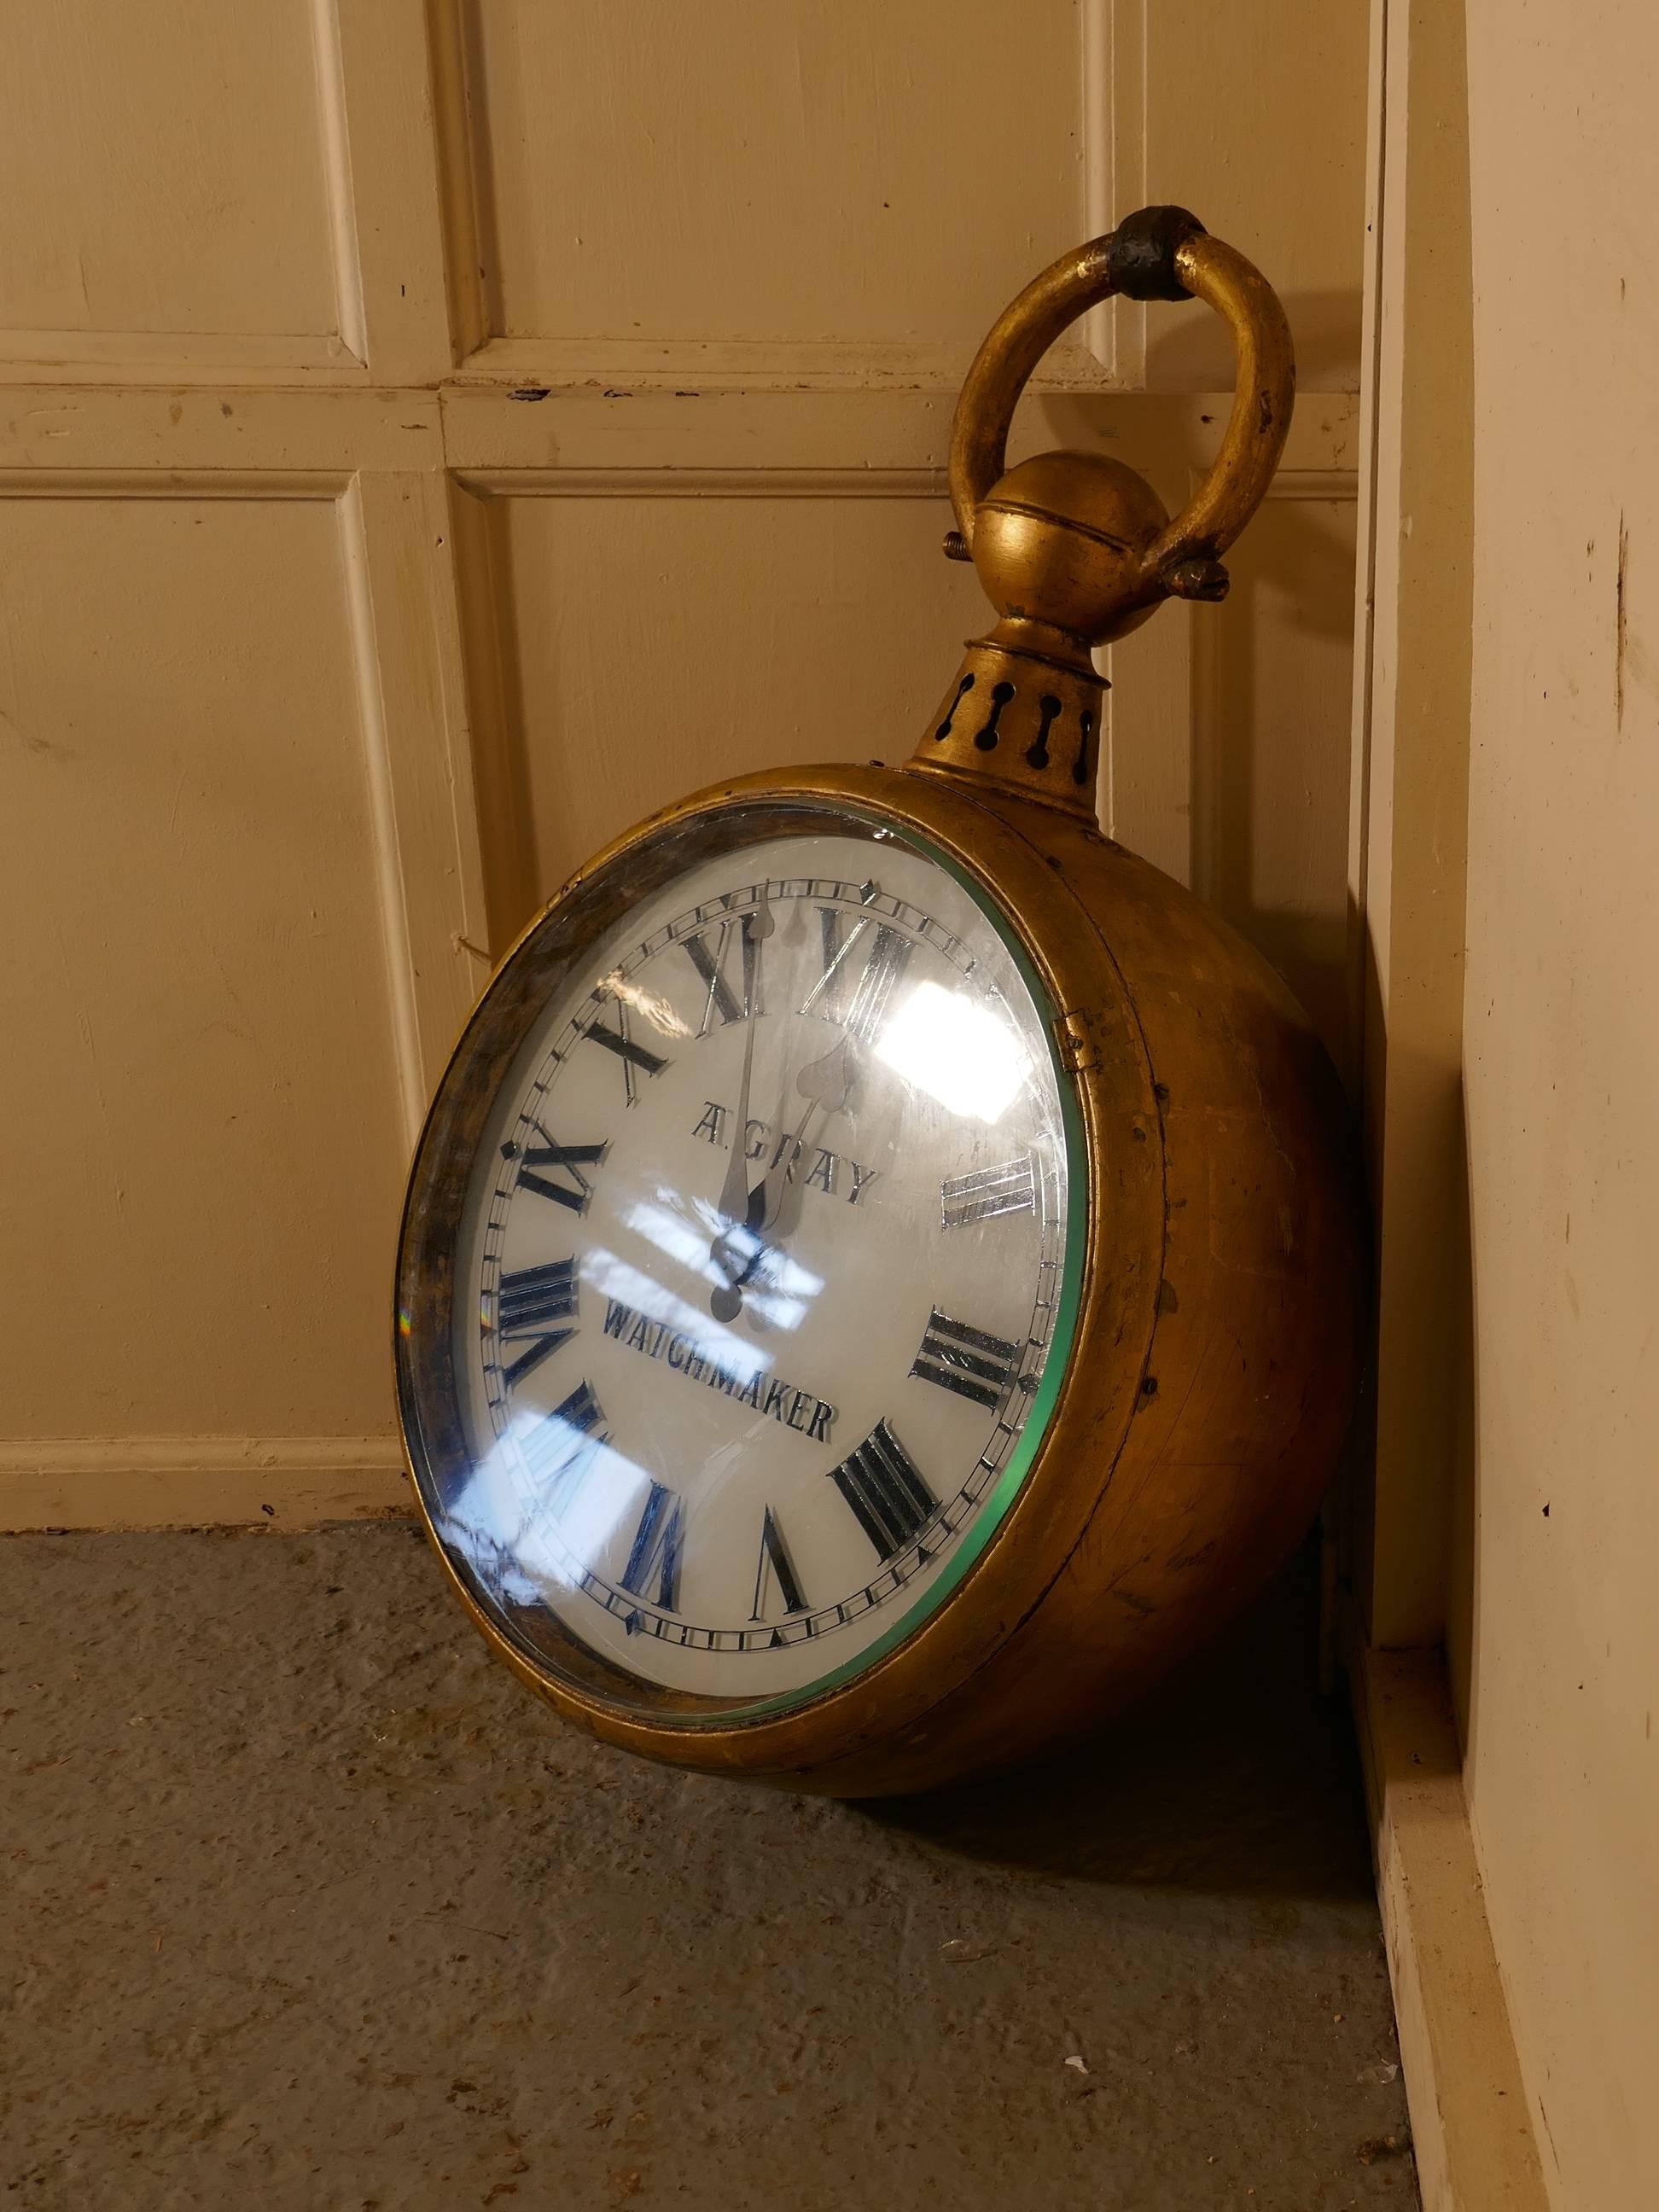 19th Century Watch Makers Shop Trades Sign, Giant Pocket Watch